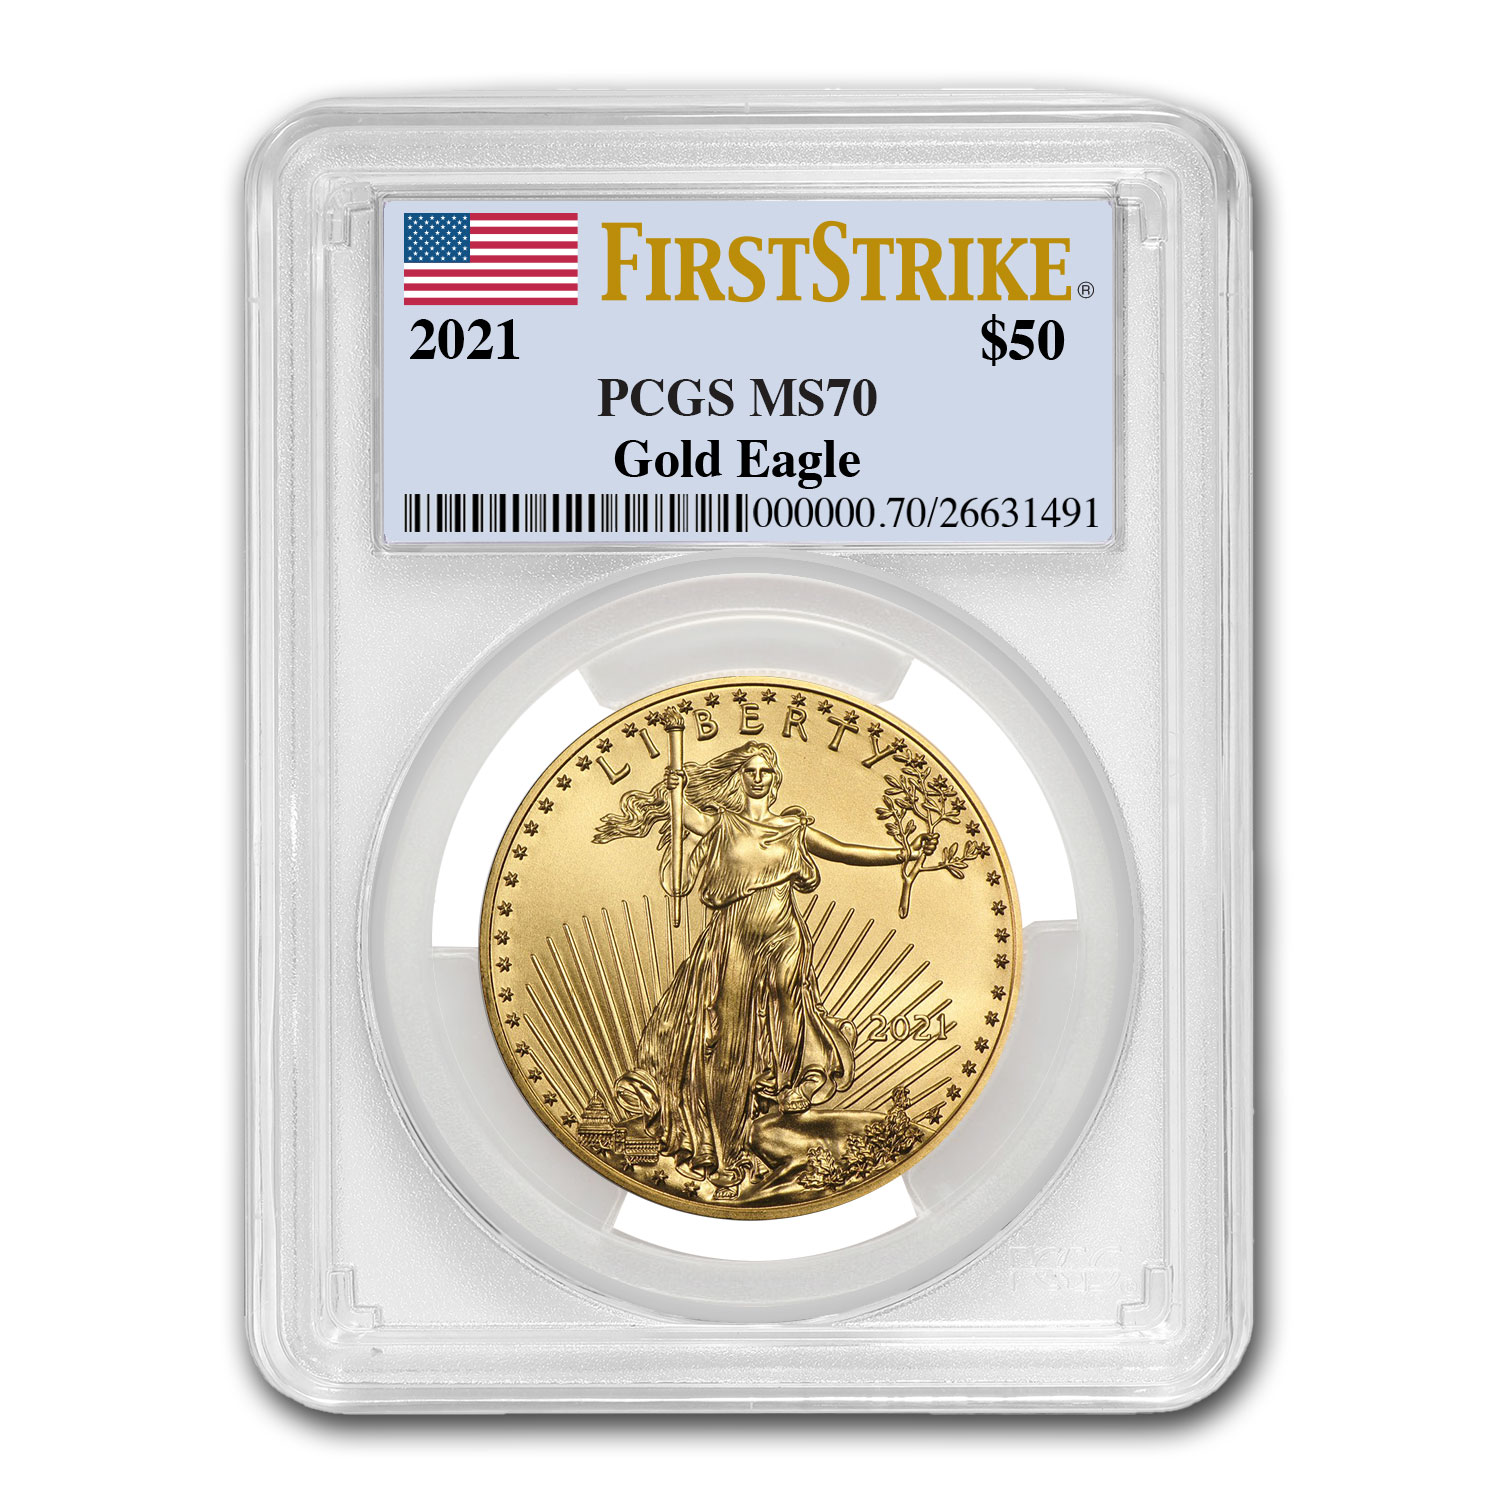 Buy 2021 1 oz American Gold Eagle MS-70 PCGS (FirstStrike